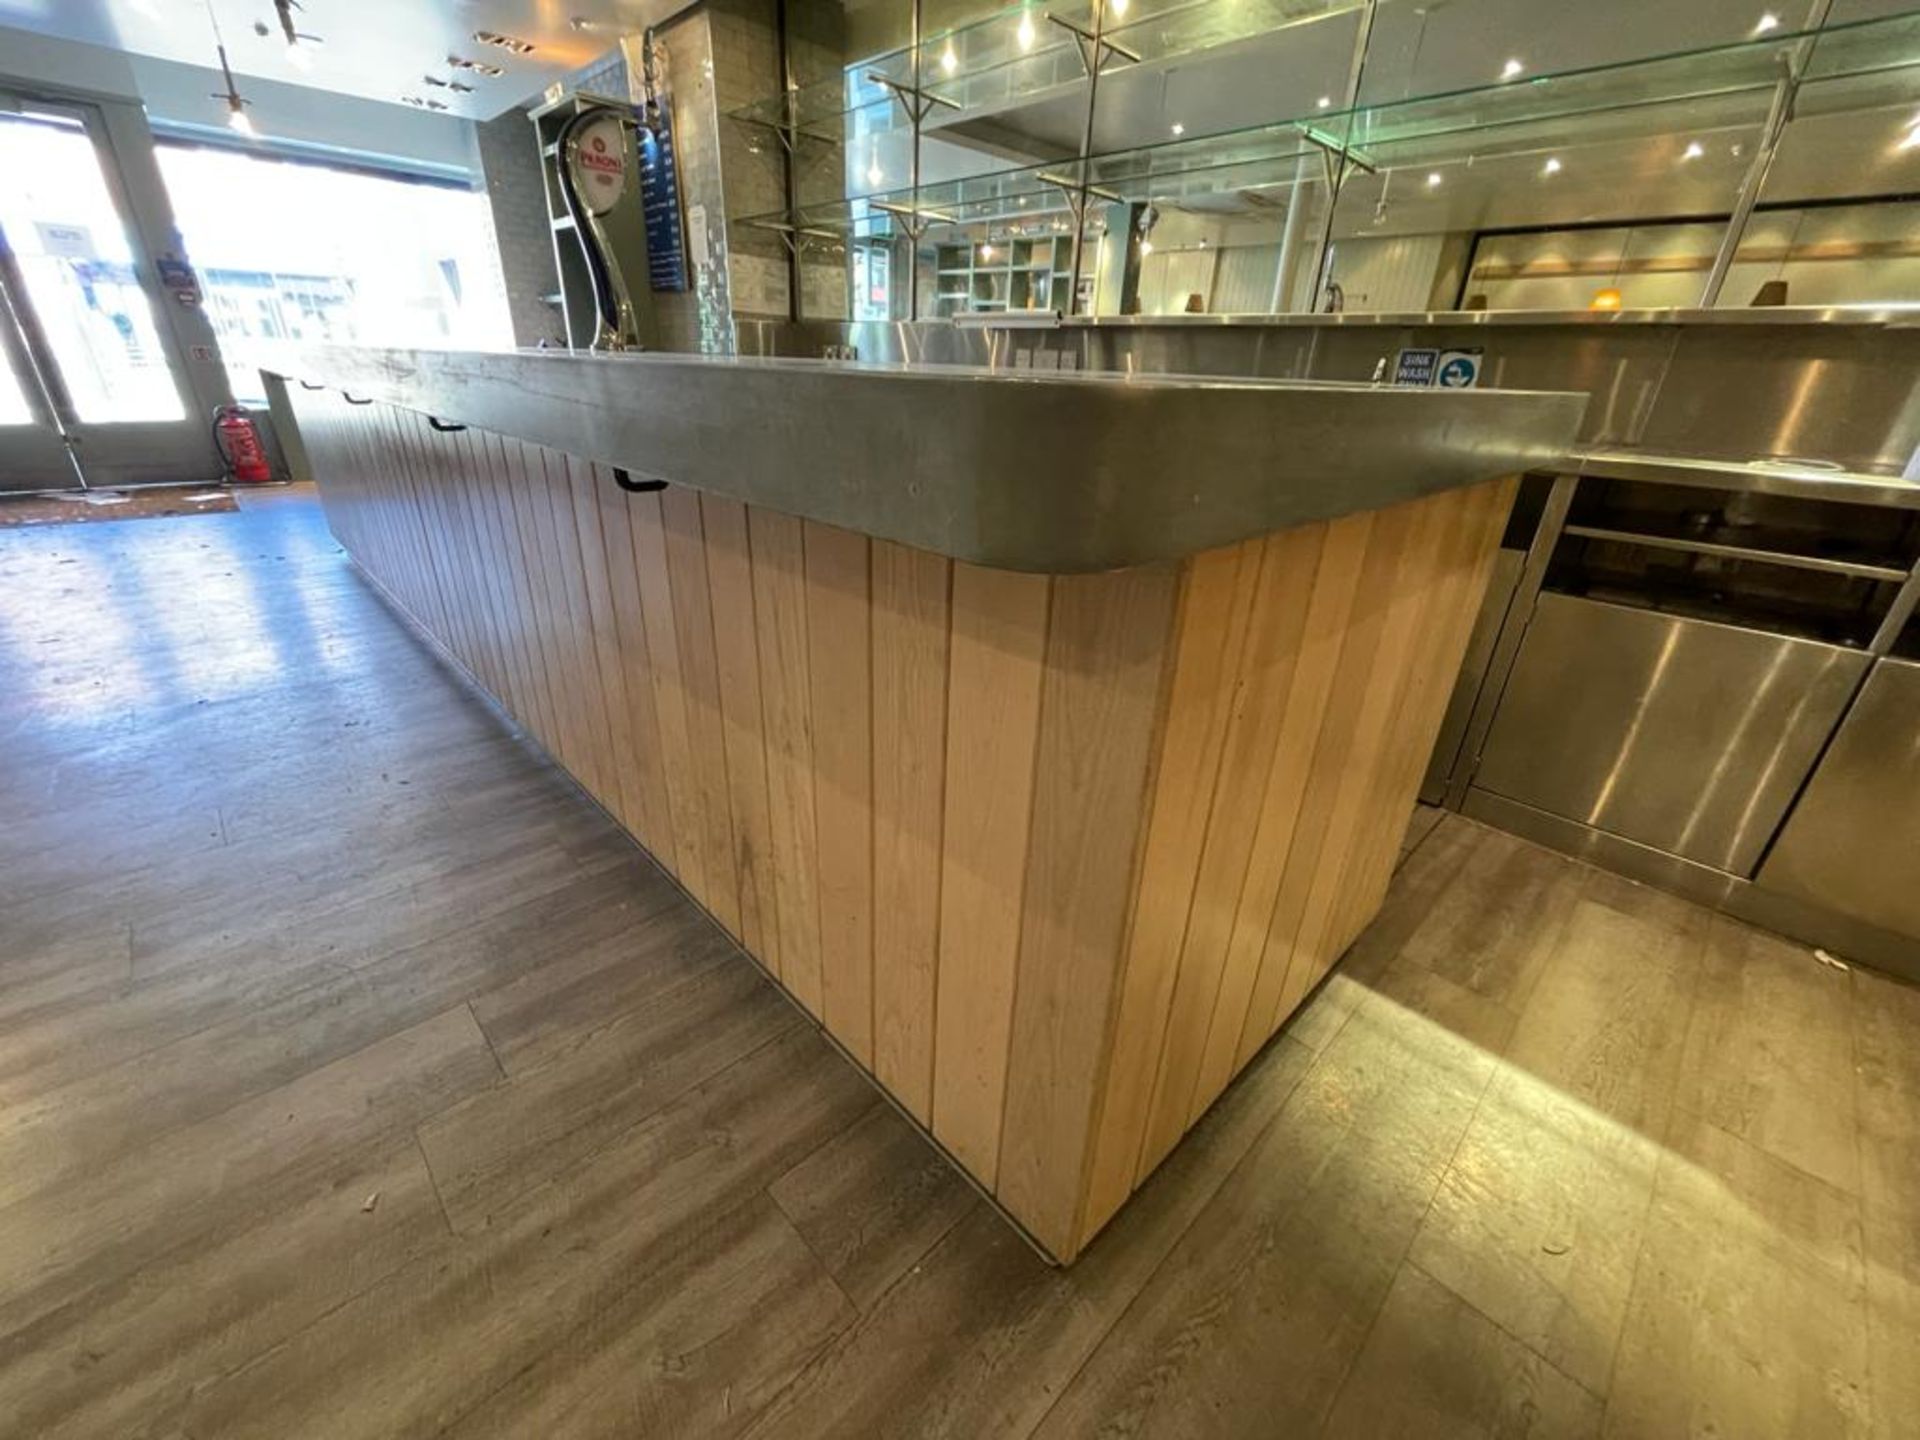 1 x Contemporary Restaurant Bar With Light Wood Panel Fascia, Sheet Metal Covered Bar Top, - Image 51 of 57